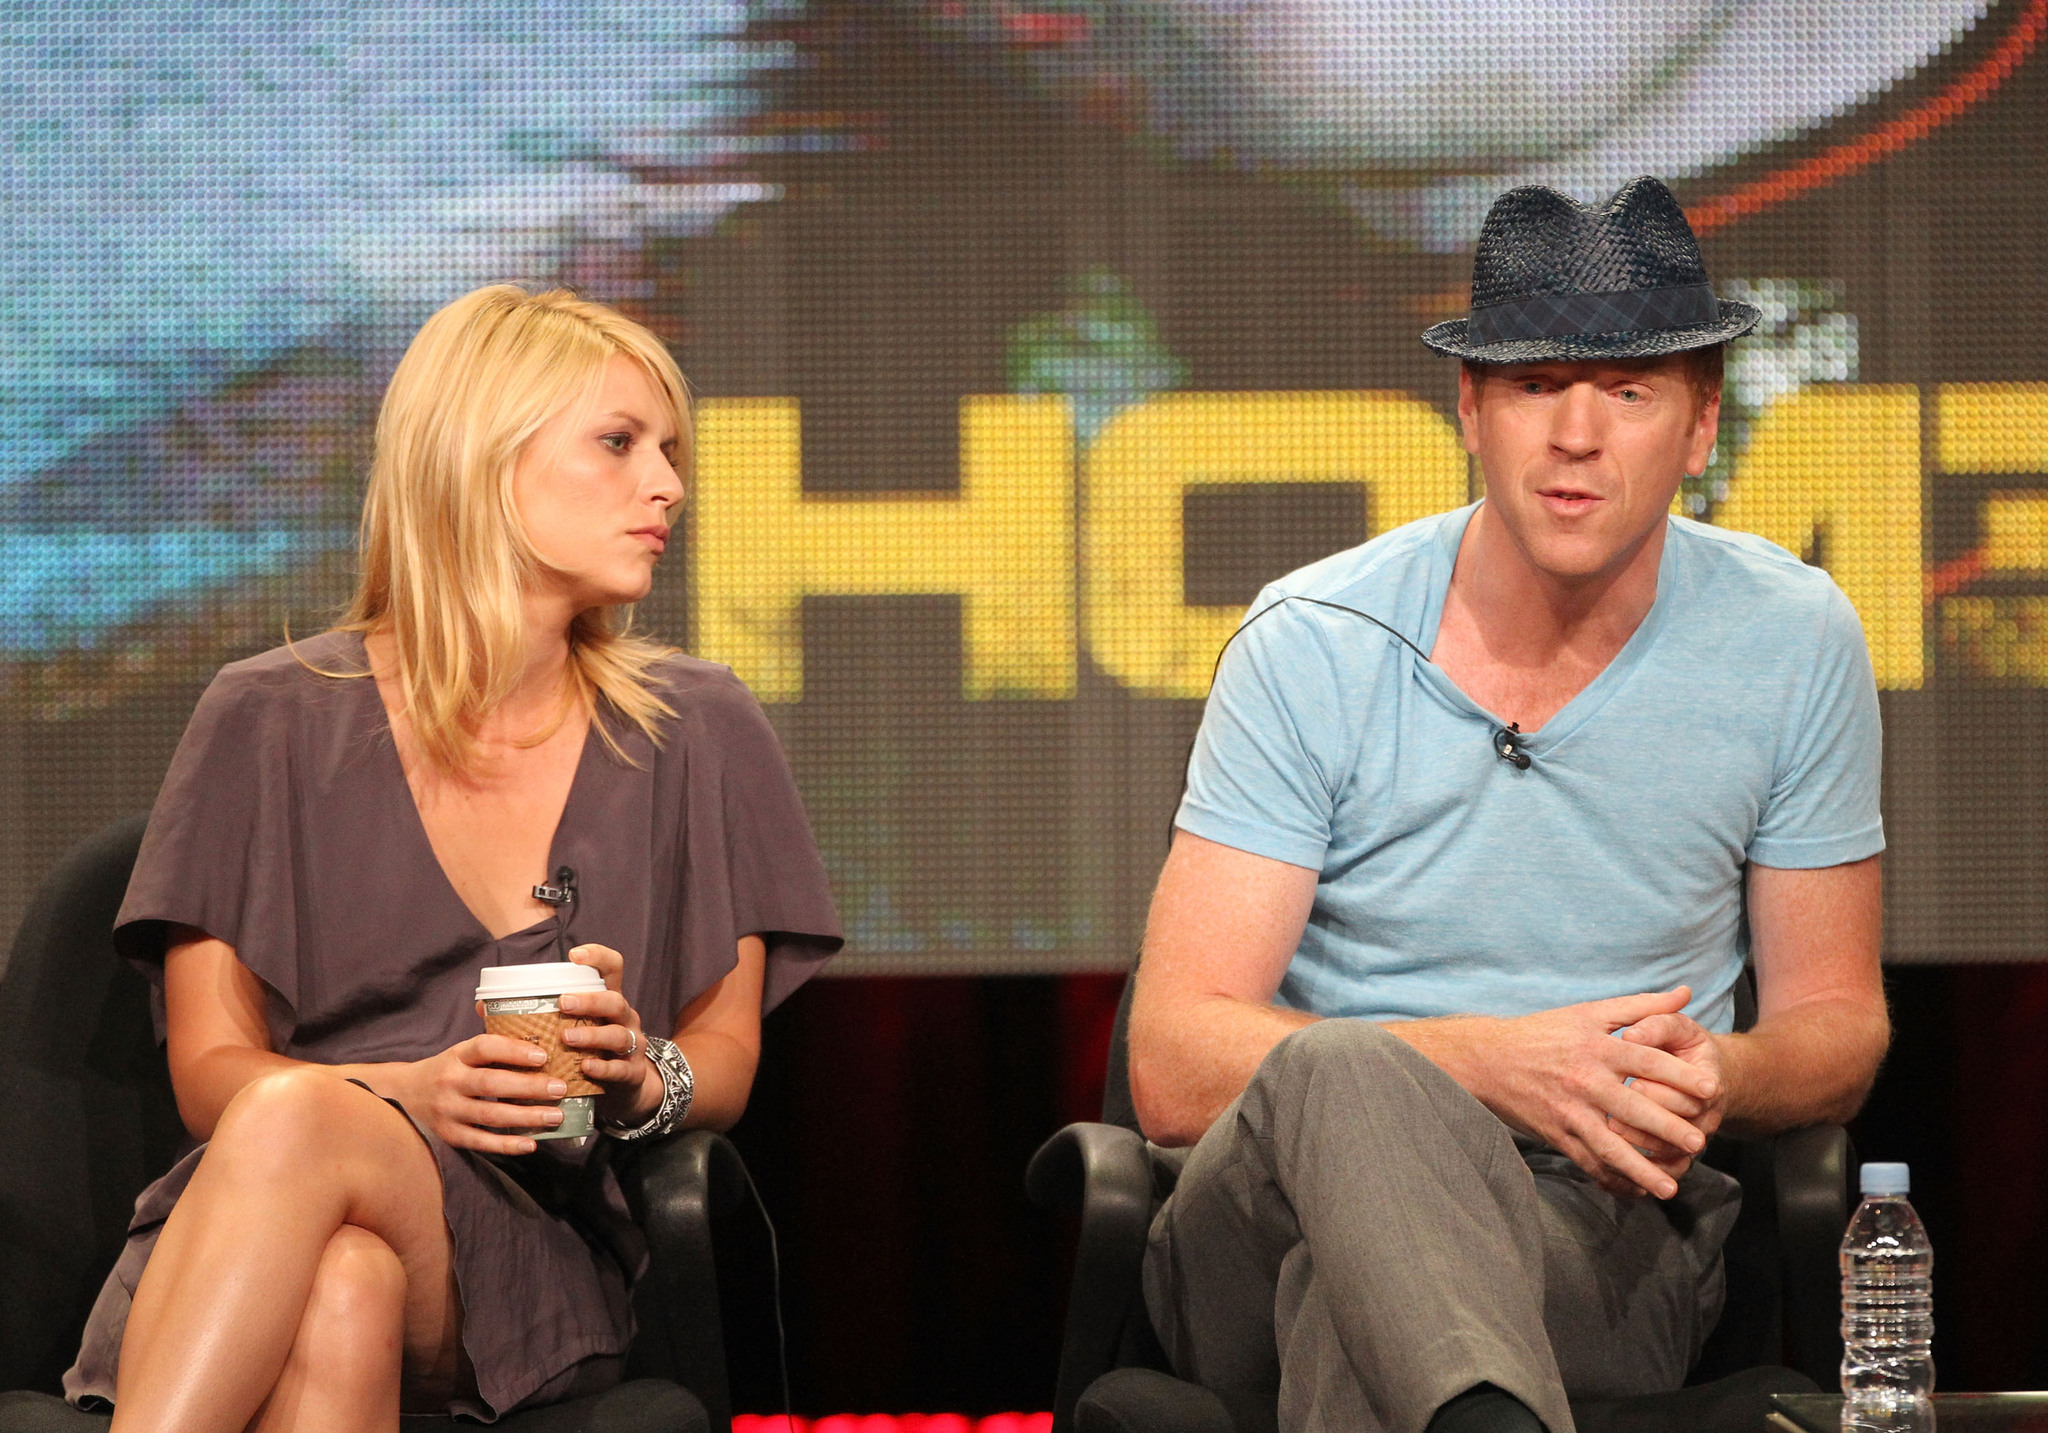 Claire Danes and Damian Lewis